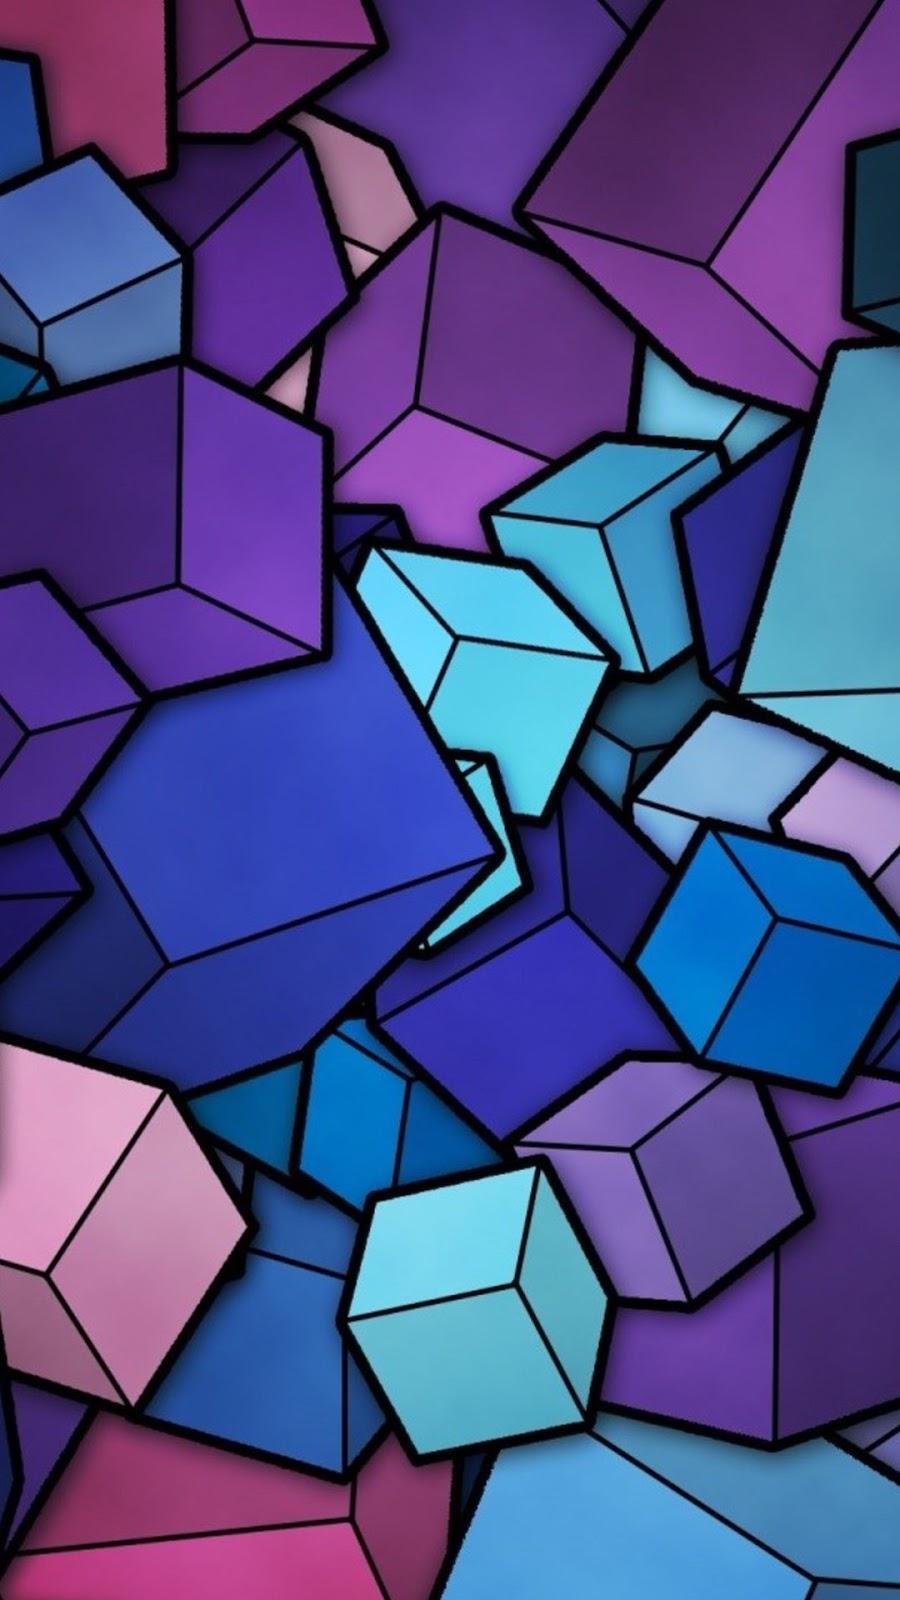 Android Image Wallpaper Abstract Blue Cyan Purple Cubes